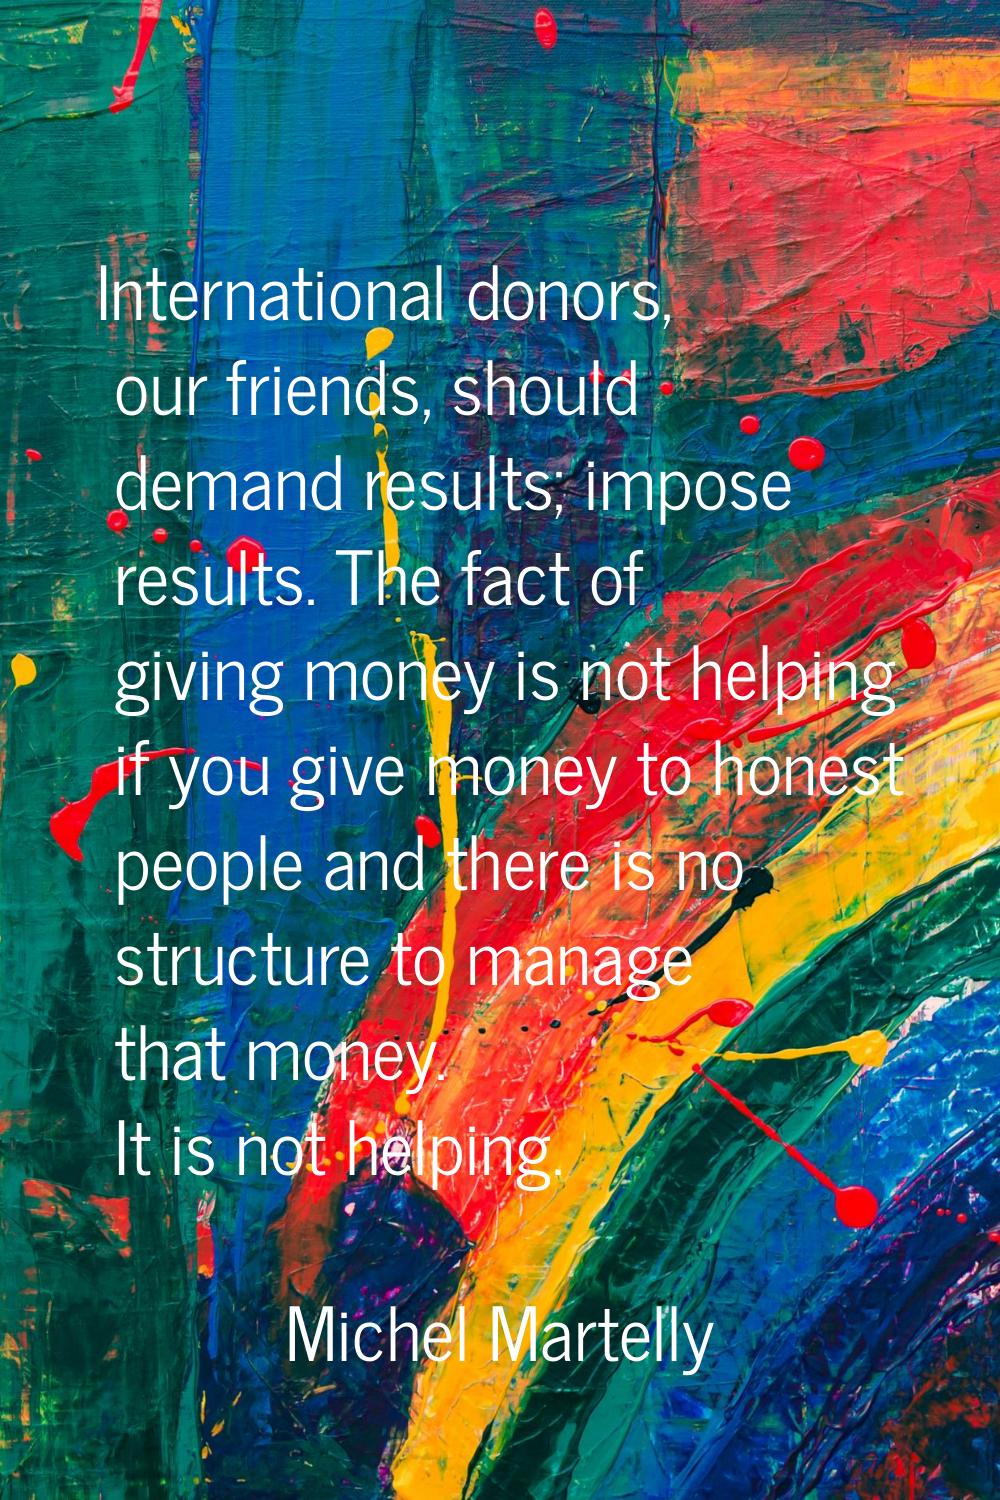 International donors, our friends, should demand results; impose results. The fact of giving money 